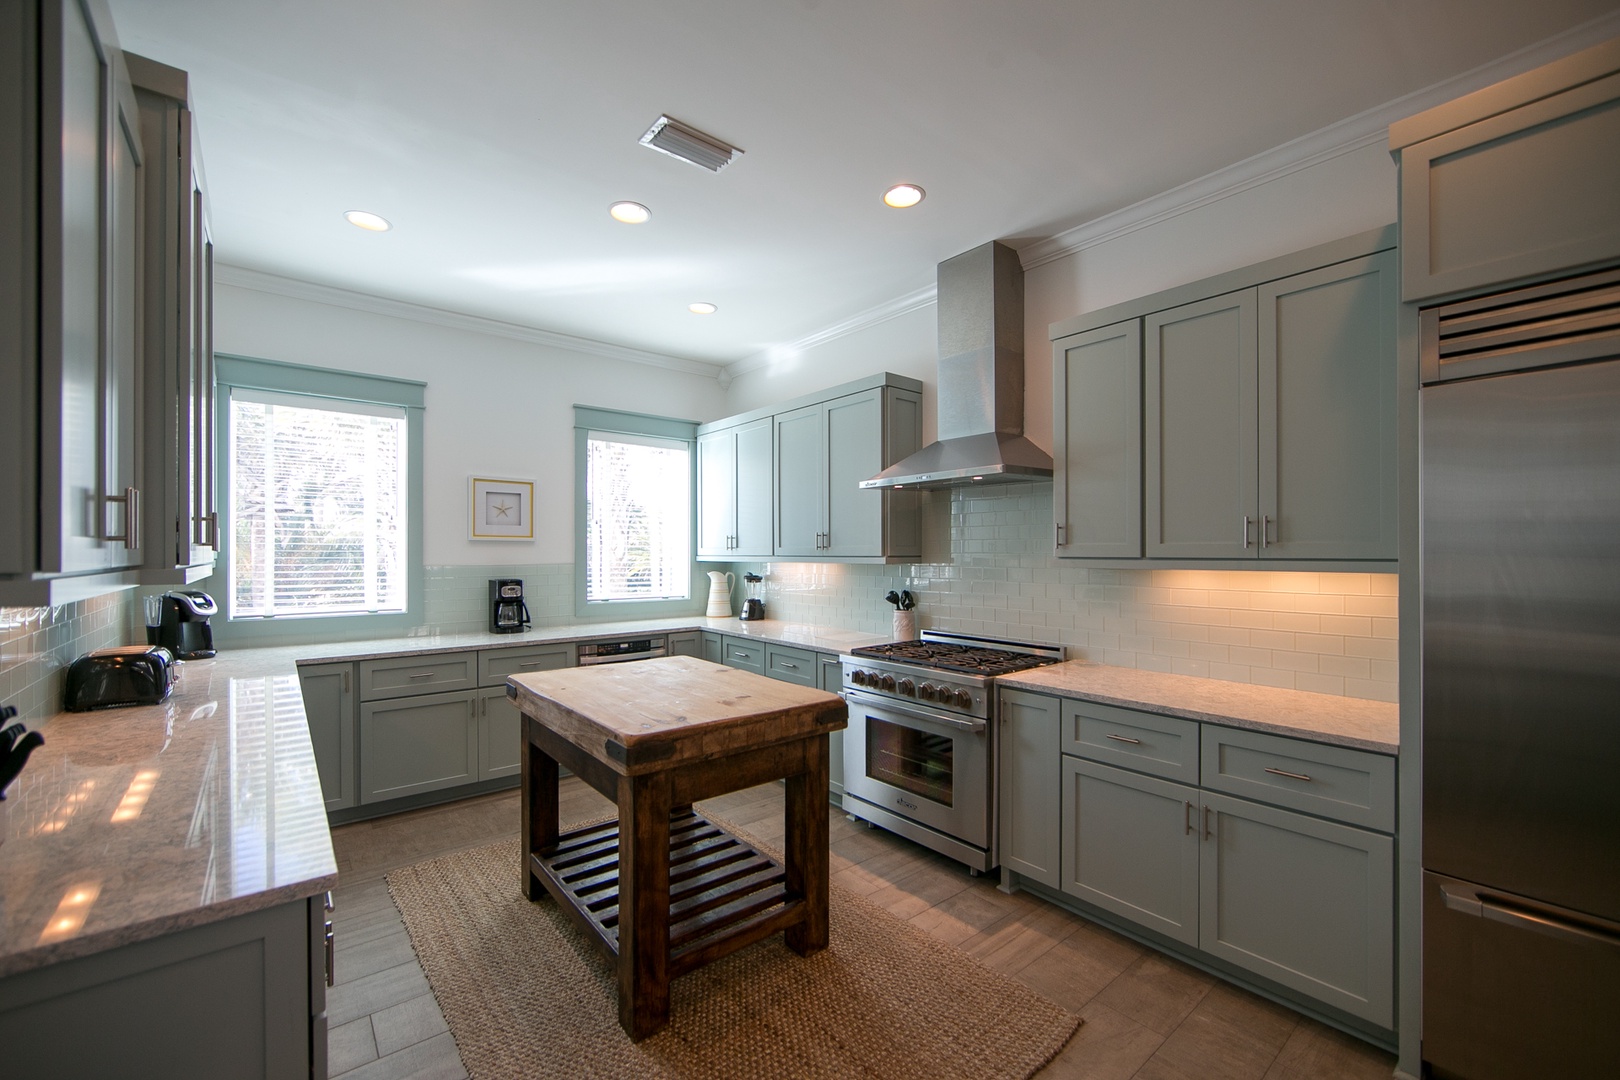 The gourmet kitchen offers high-end stainless steel appliances, a gas range, and endless counter space!